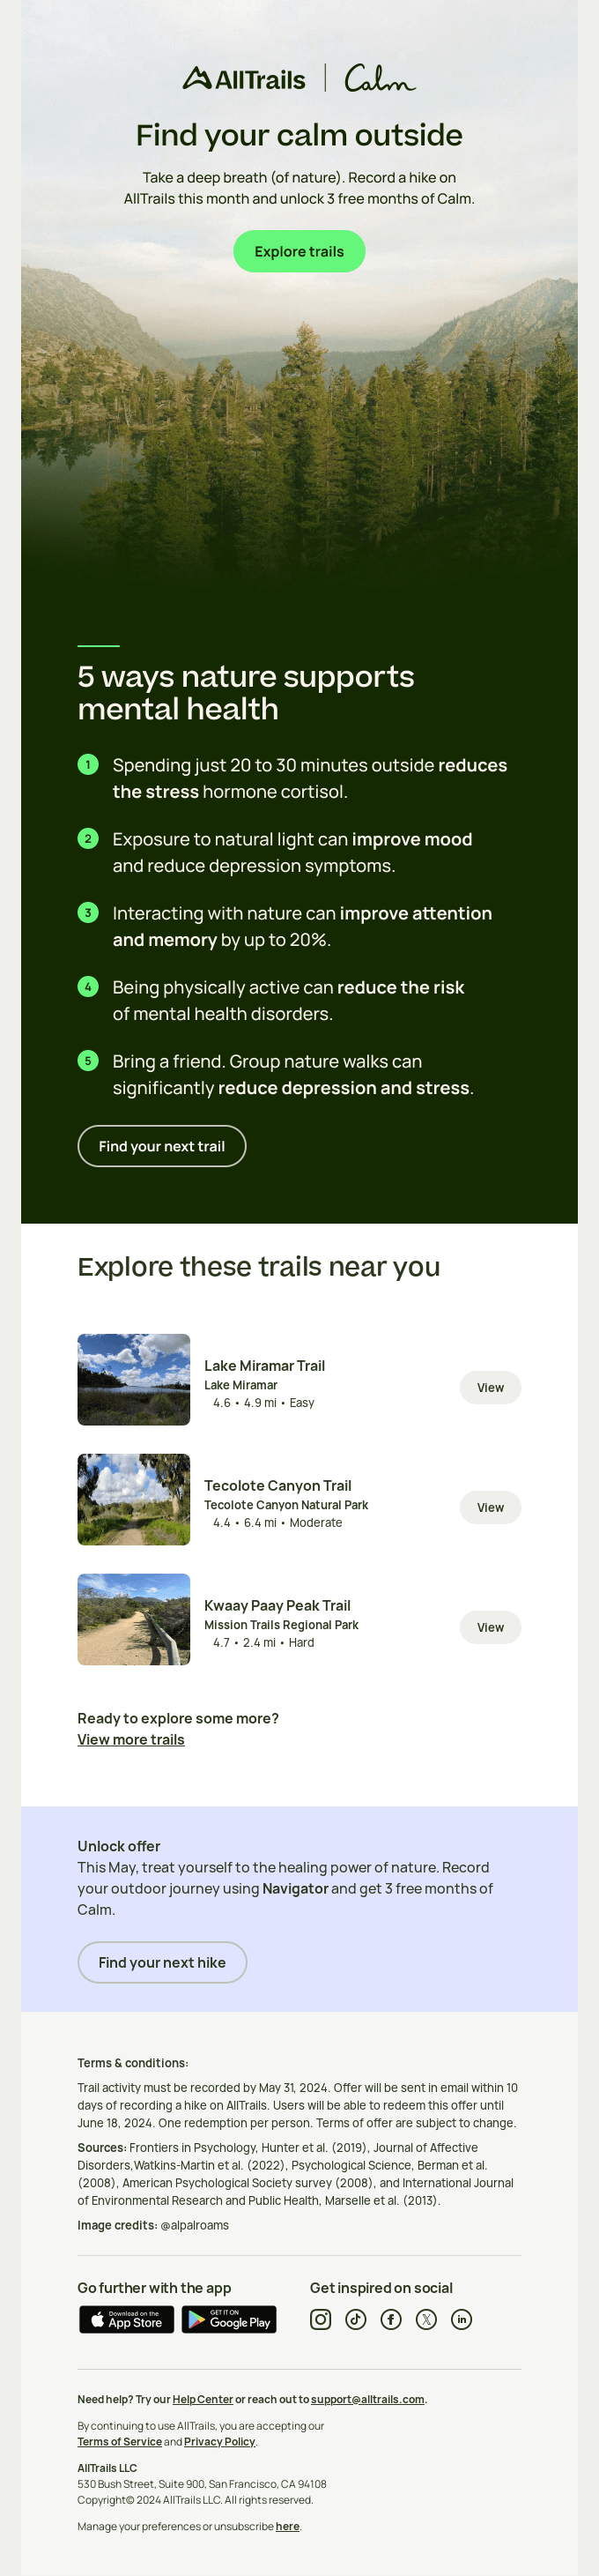 AllTrails’ email emphasizing the positive impact of participating in outdoor activities on mental health